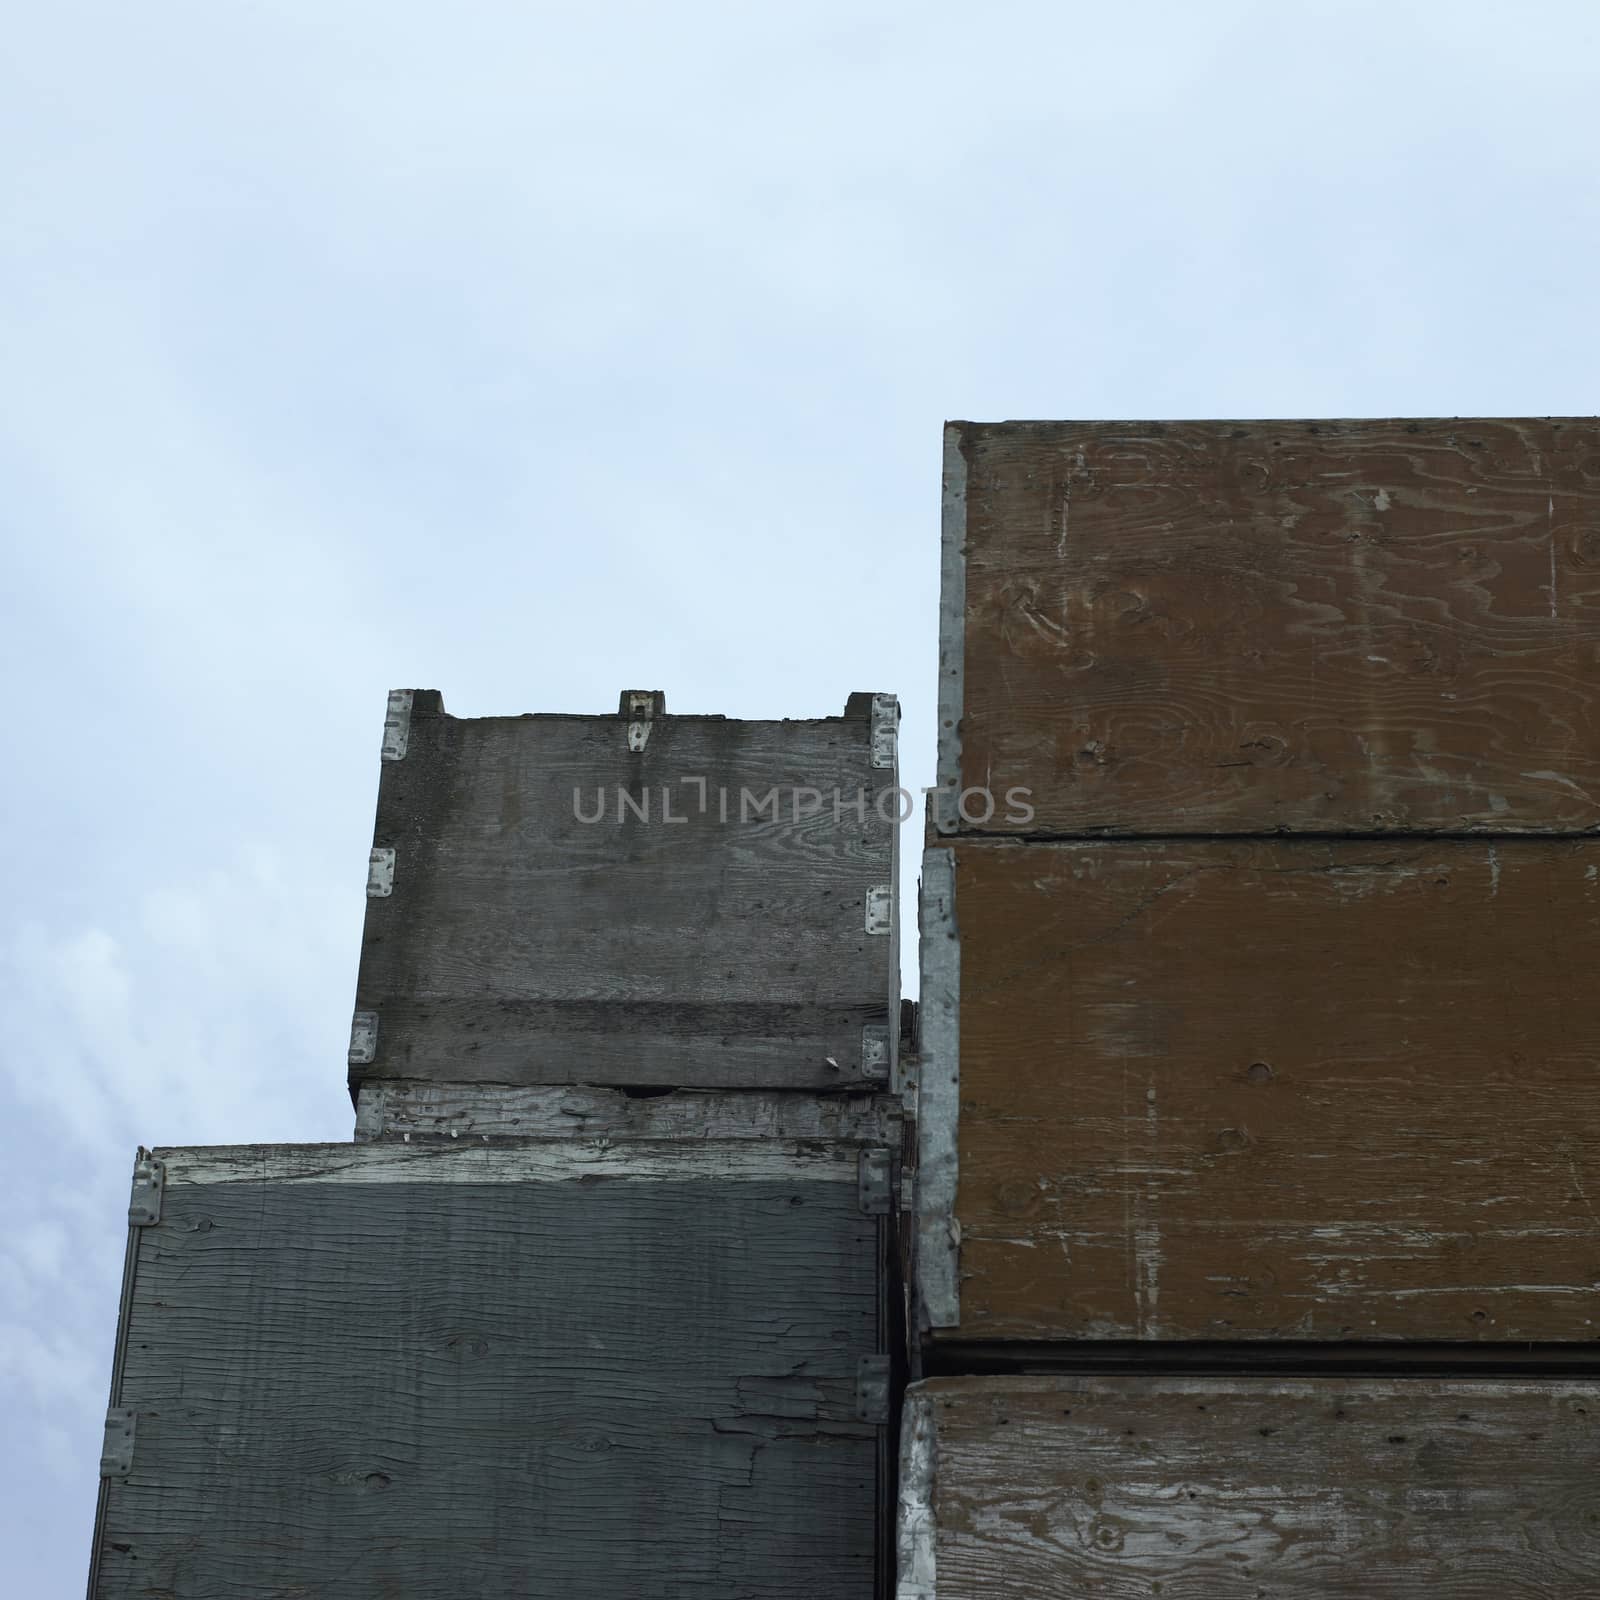 Stacks of large industrial crates against cloudy sky